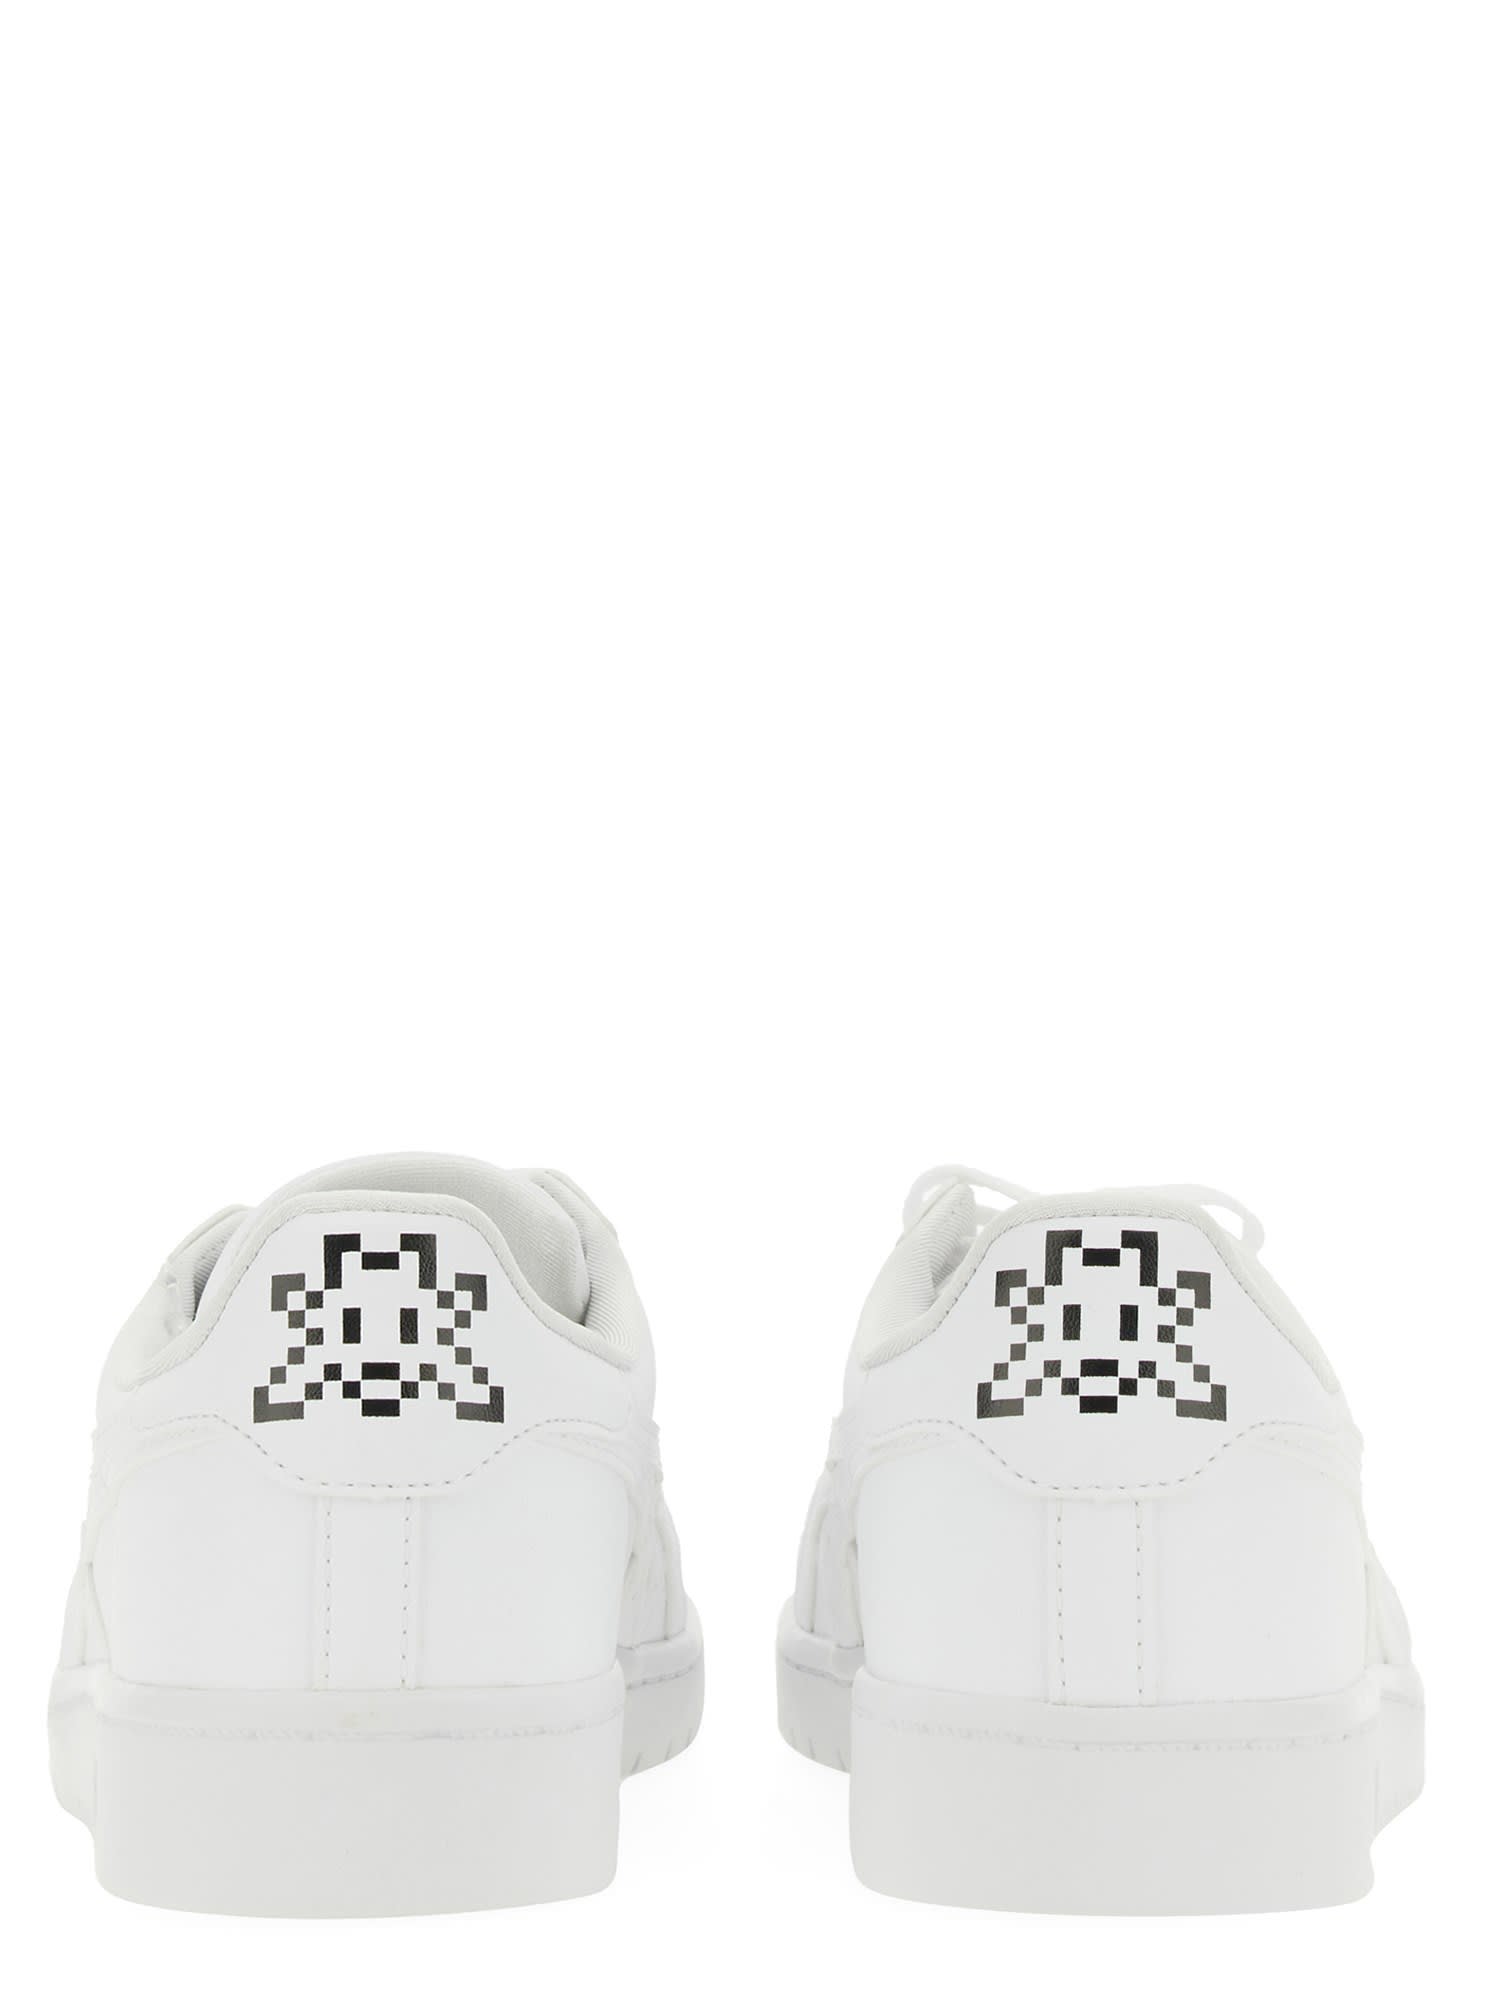 Comme Des Garcons Shirt X Asics X Invader Japan S Sneakers In White